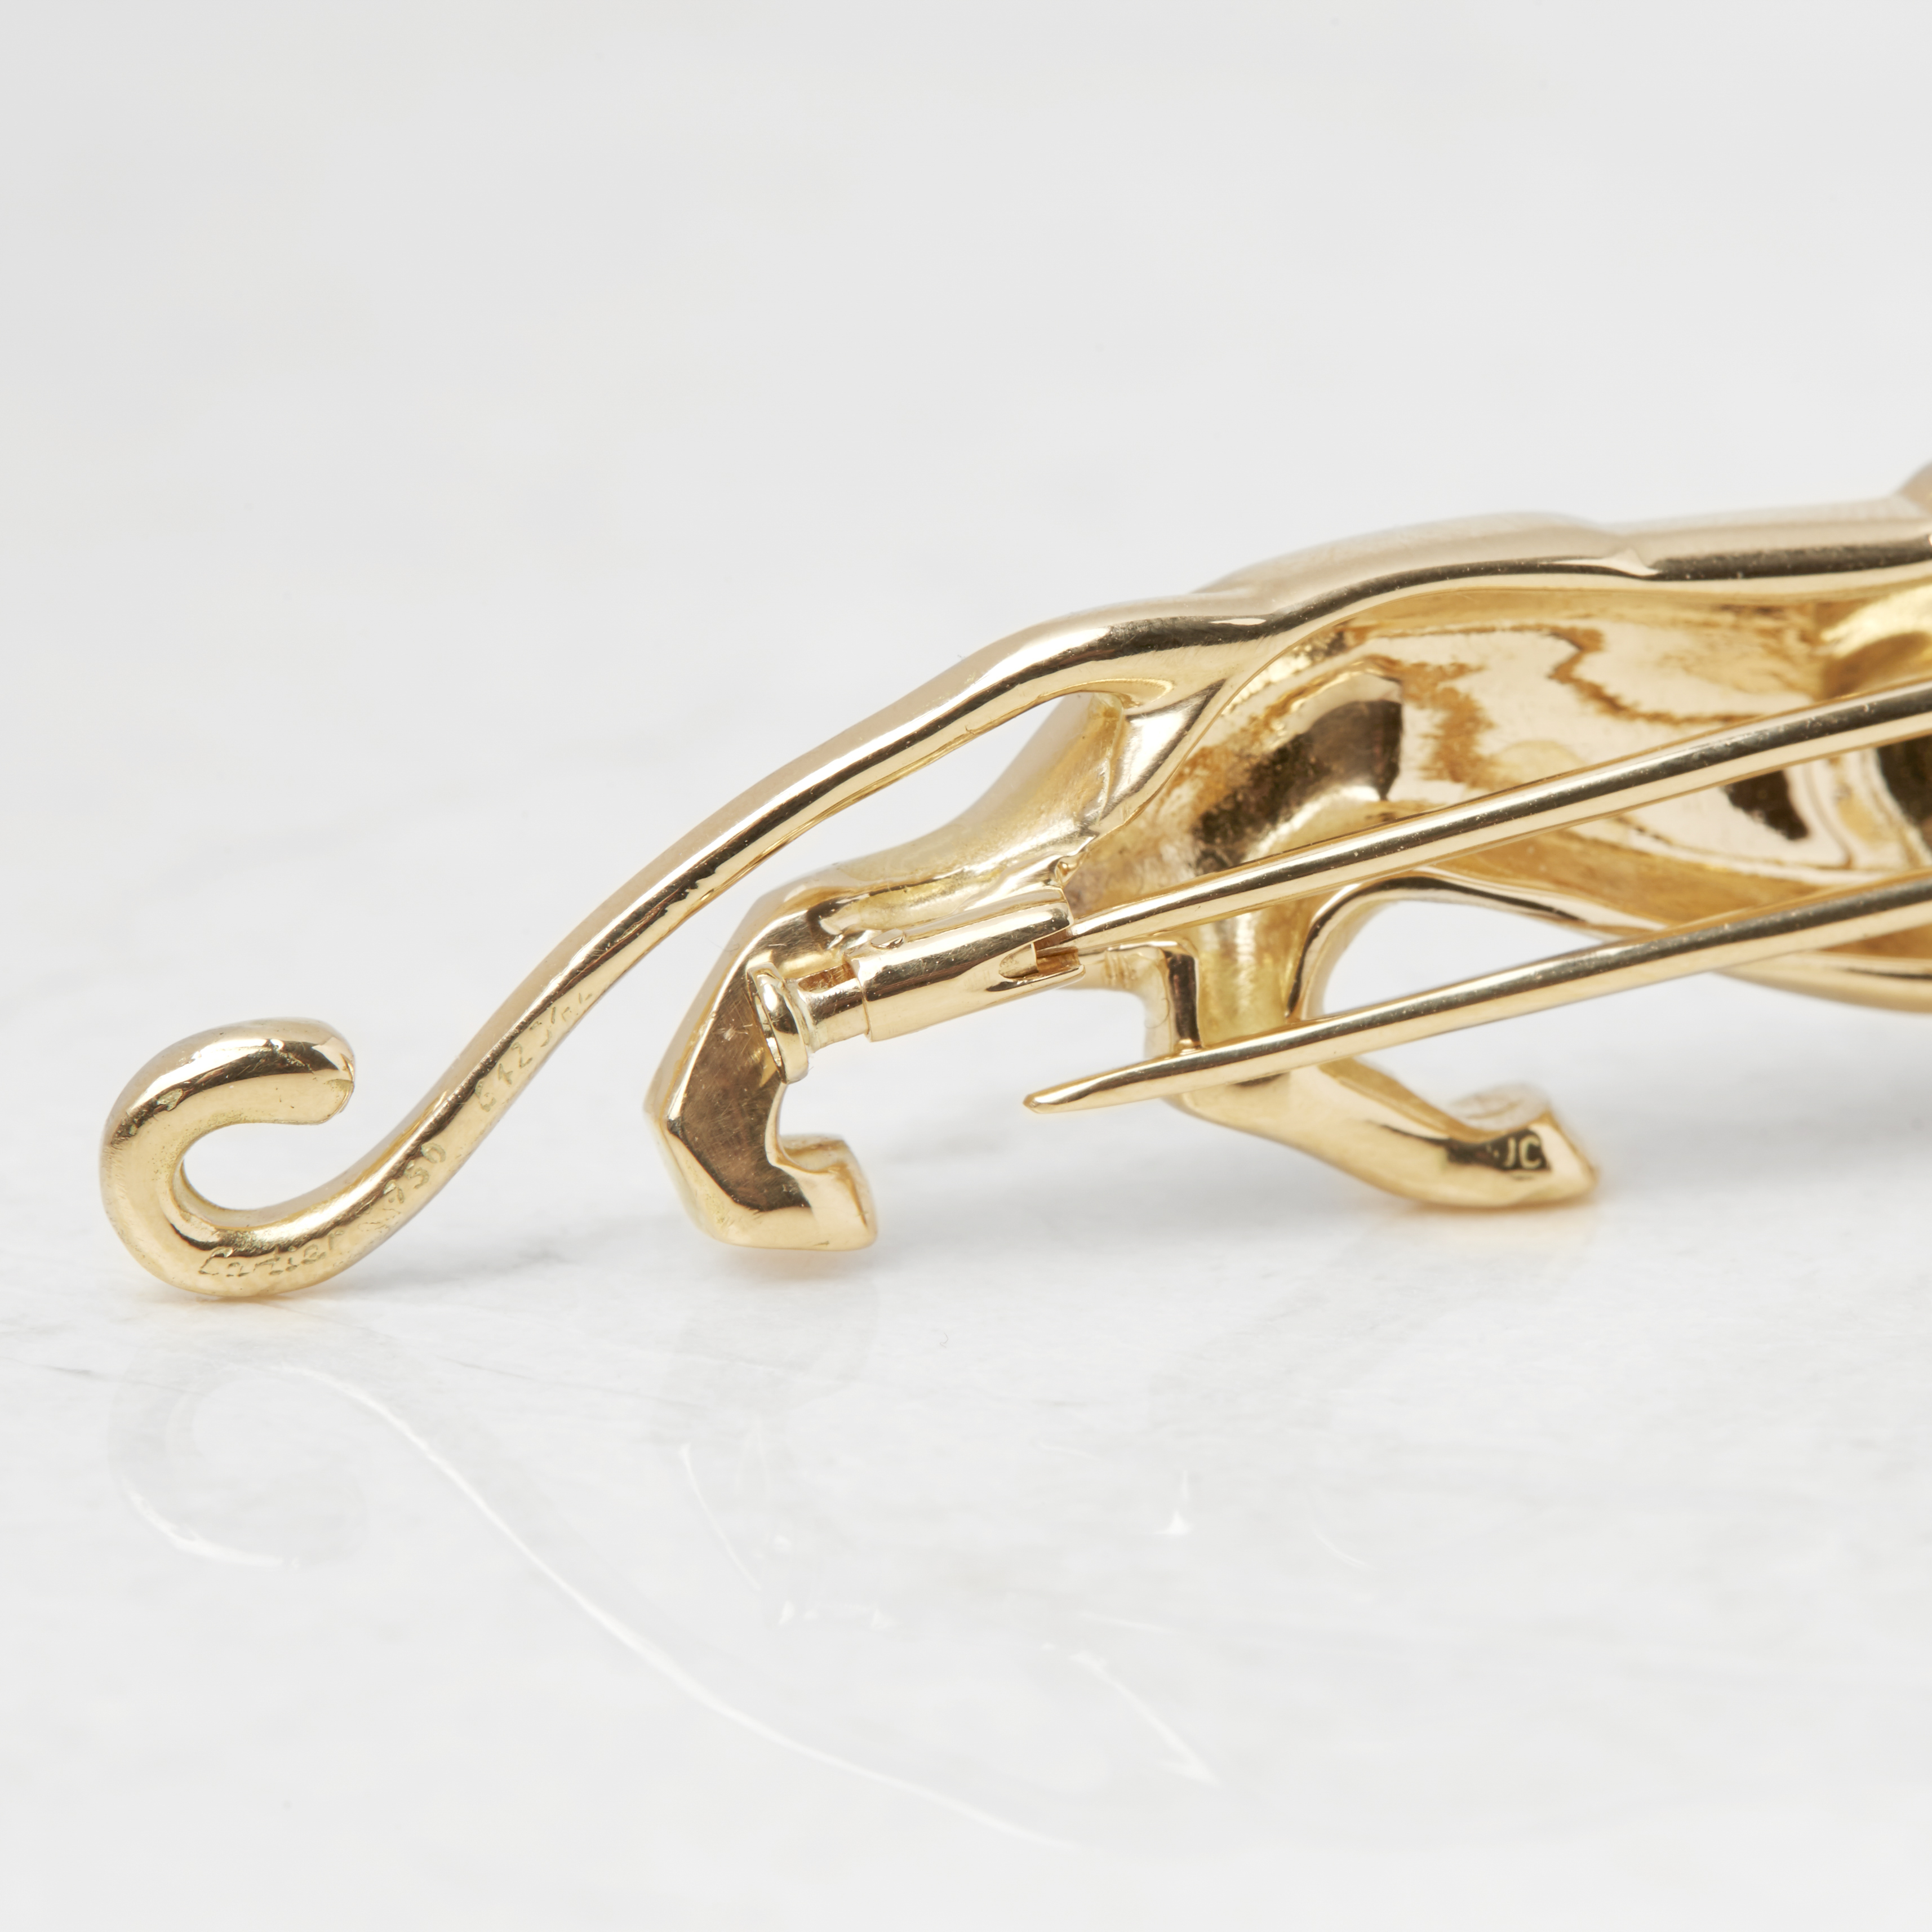 Cartier, 18k Yellow Gold Panthère Brooch - Image 5 of 9